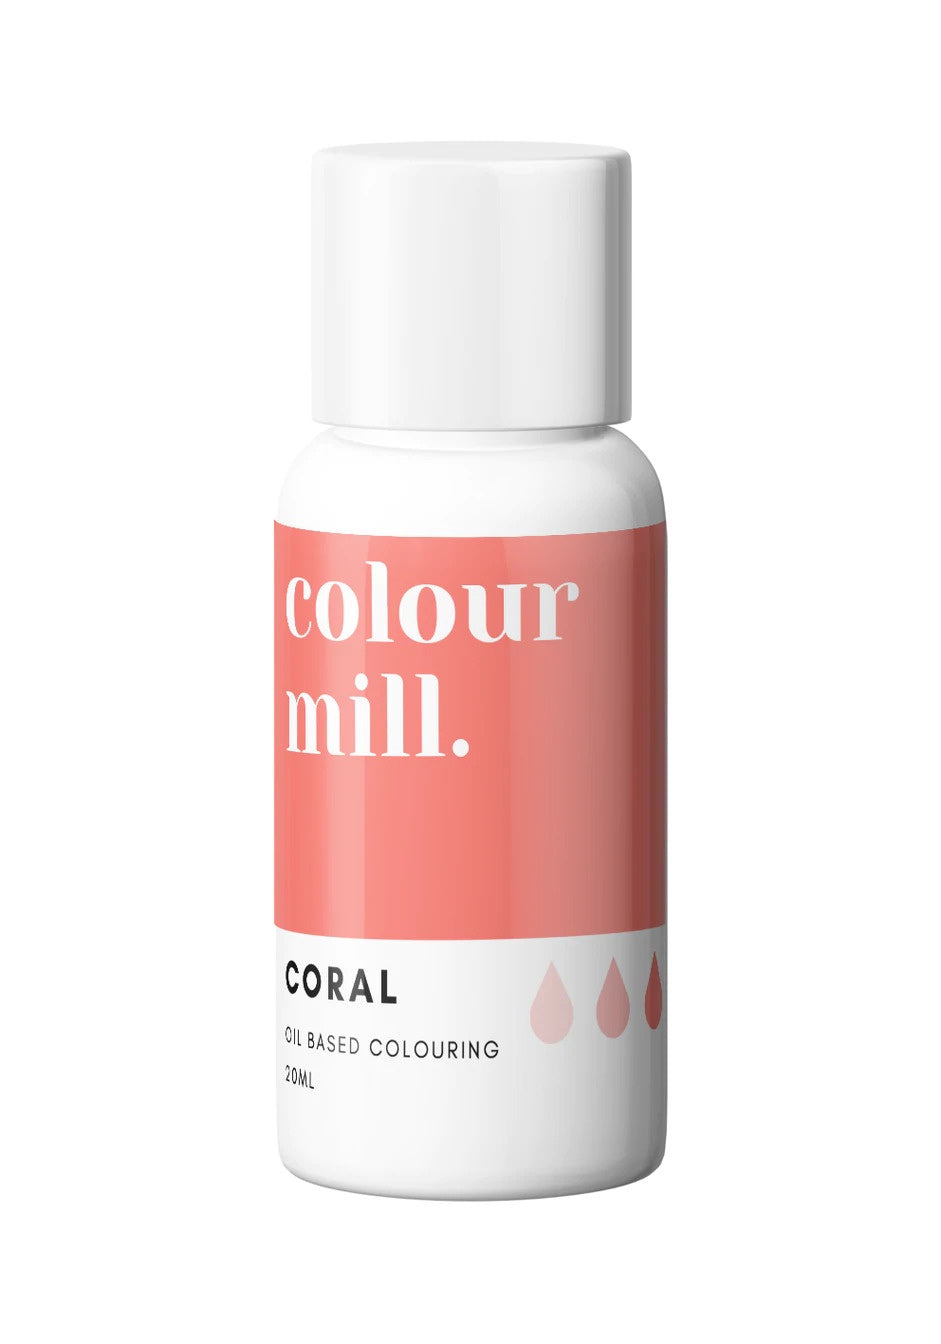 Coral, 20ml, Colour Mill Oil Based Colouring